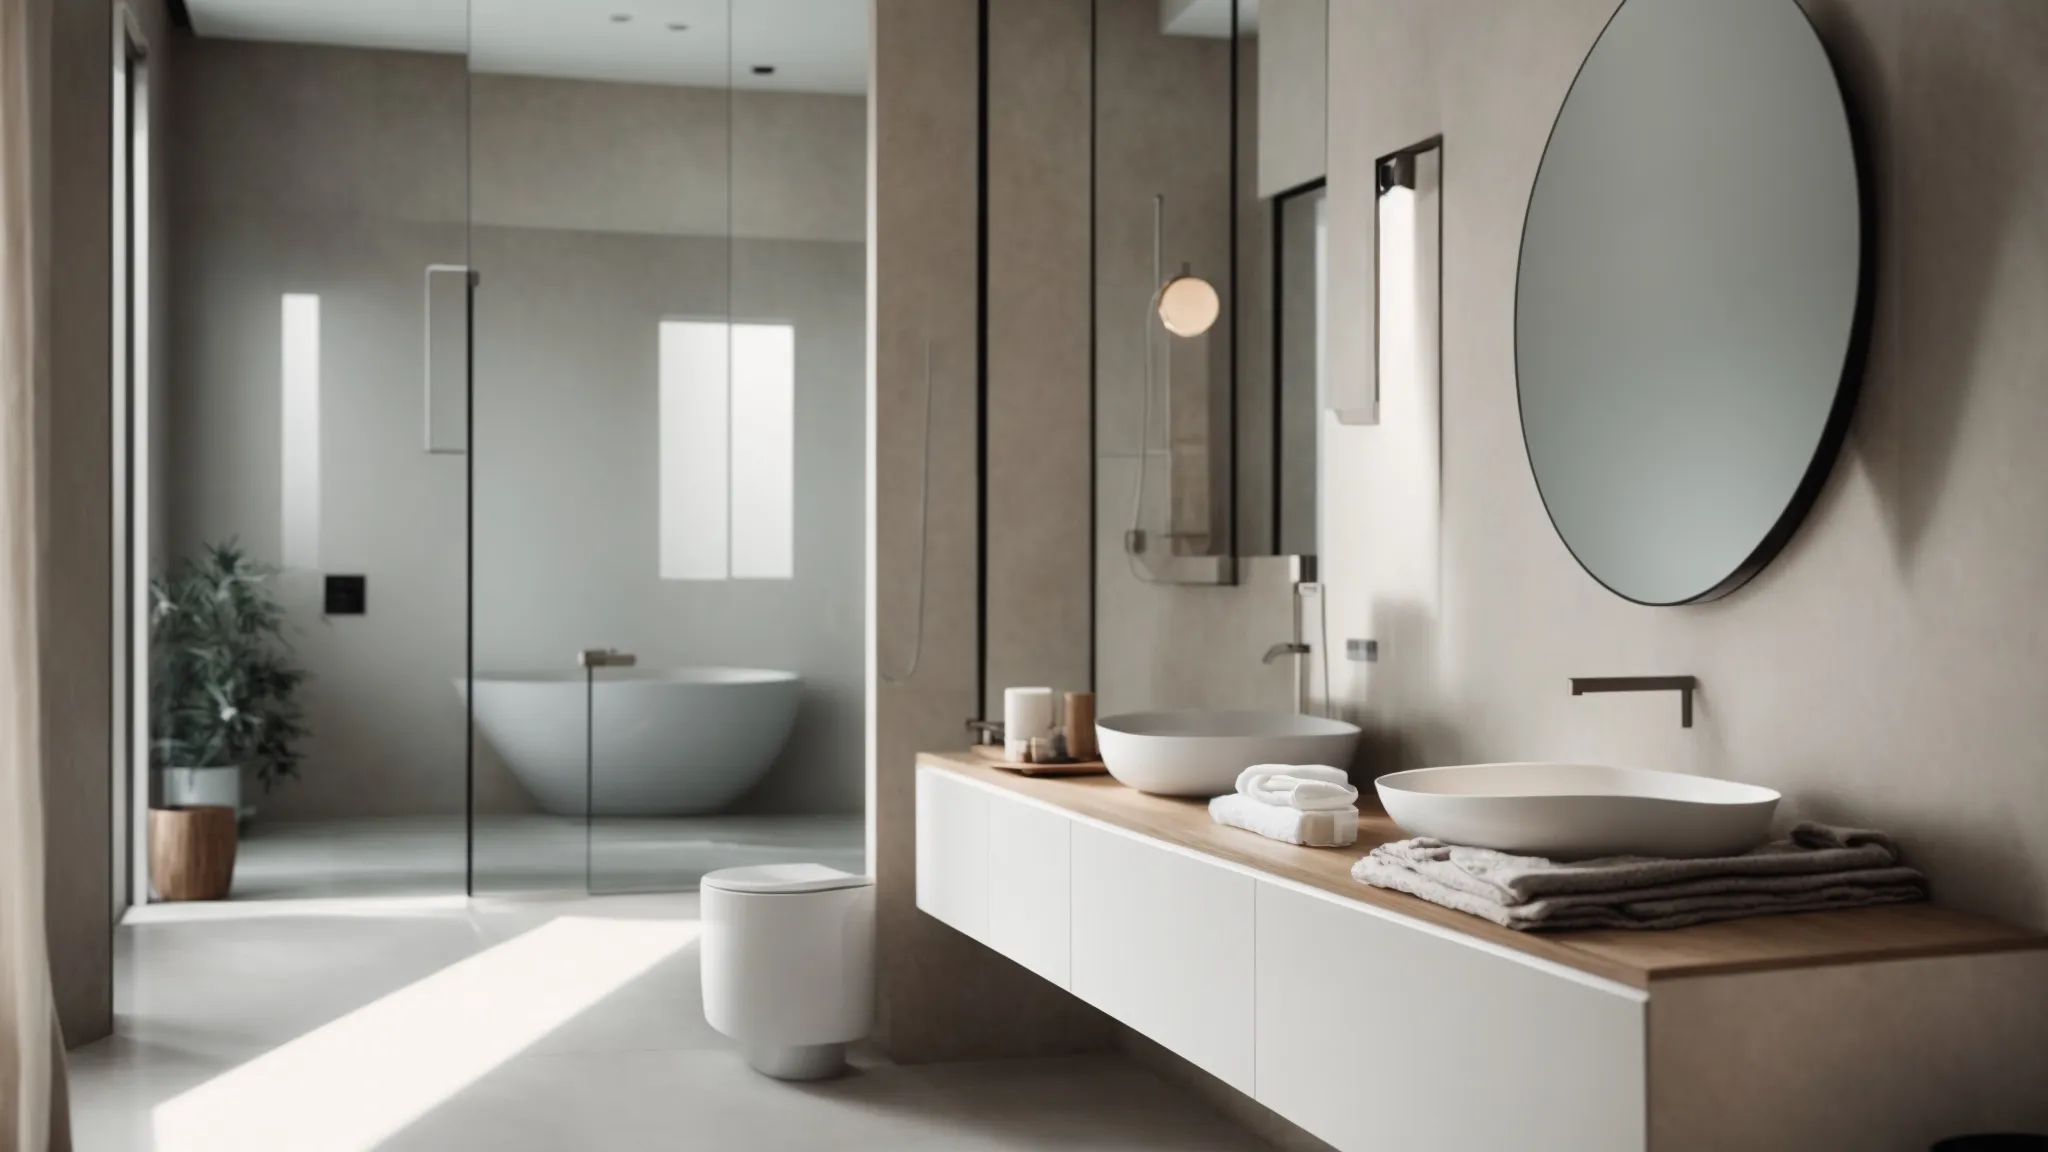 a modern minimalist bathroom with gleaming surfaces and streamlined fixtures stands ready to offer a serene retreat.